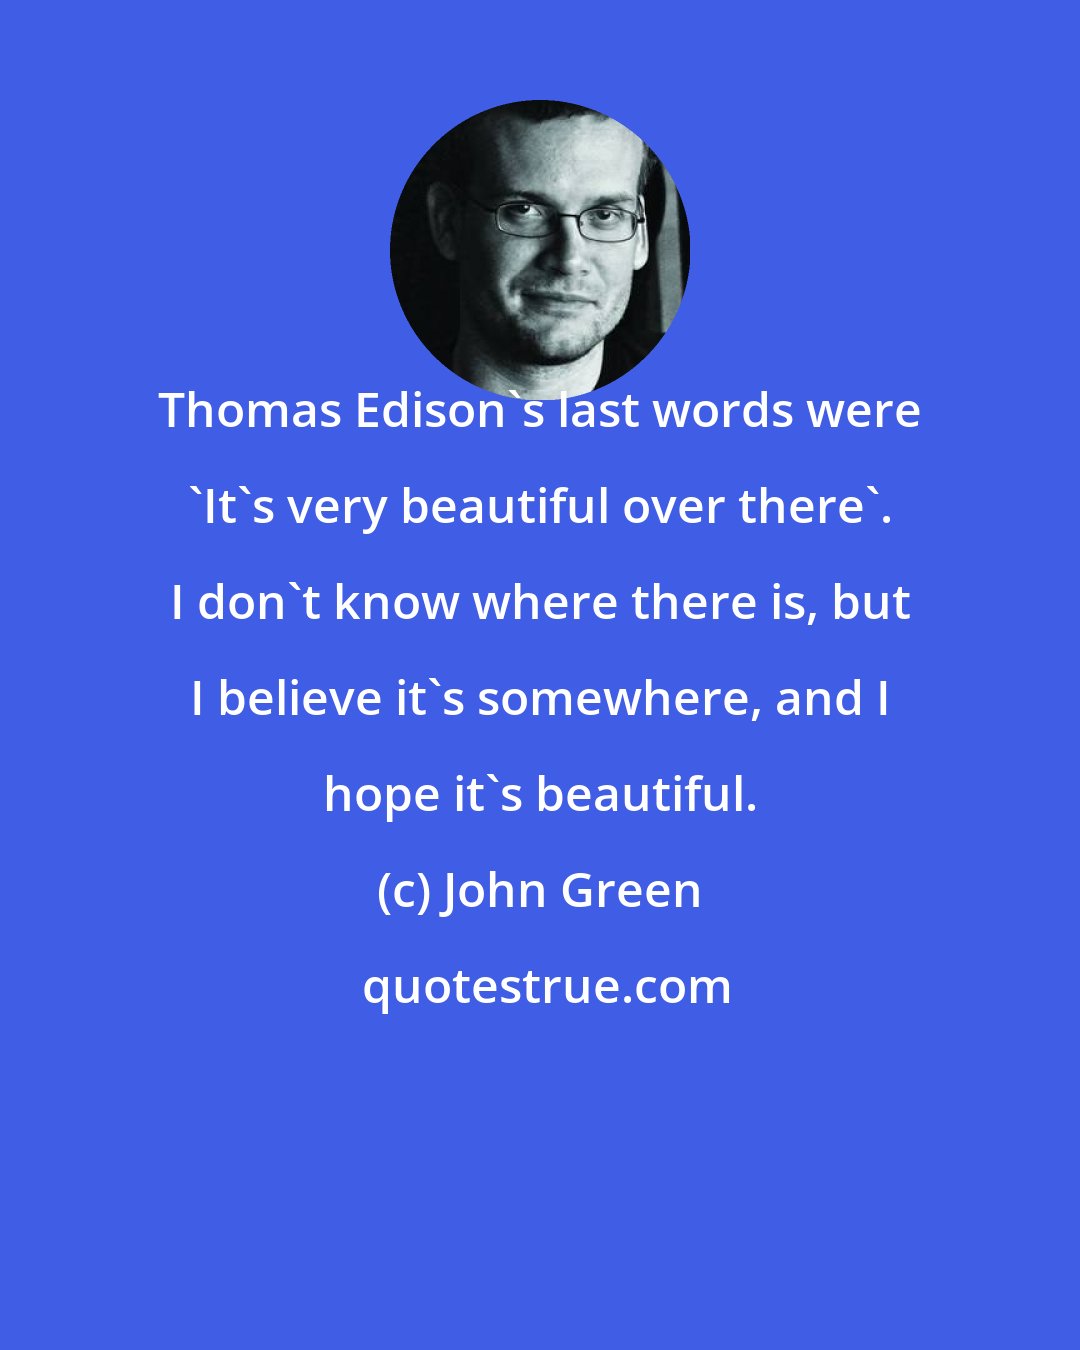 John Green: Thomas Edison's last words were 'It's very beautiful over there'. I don't know where there is, but I believe it's somewhere, and I hope it's beautiful.